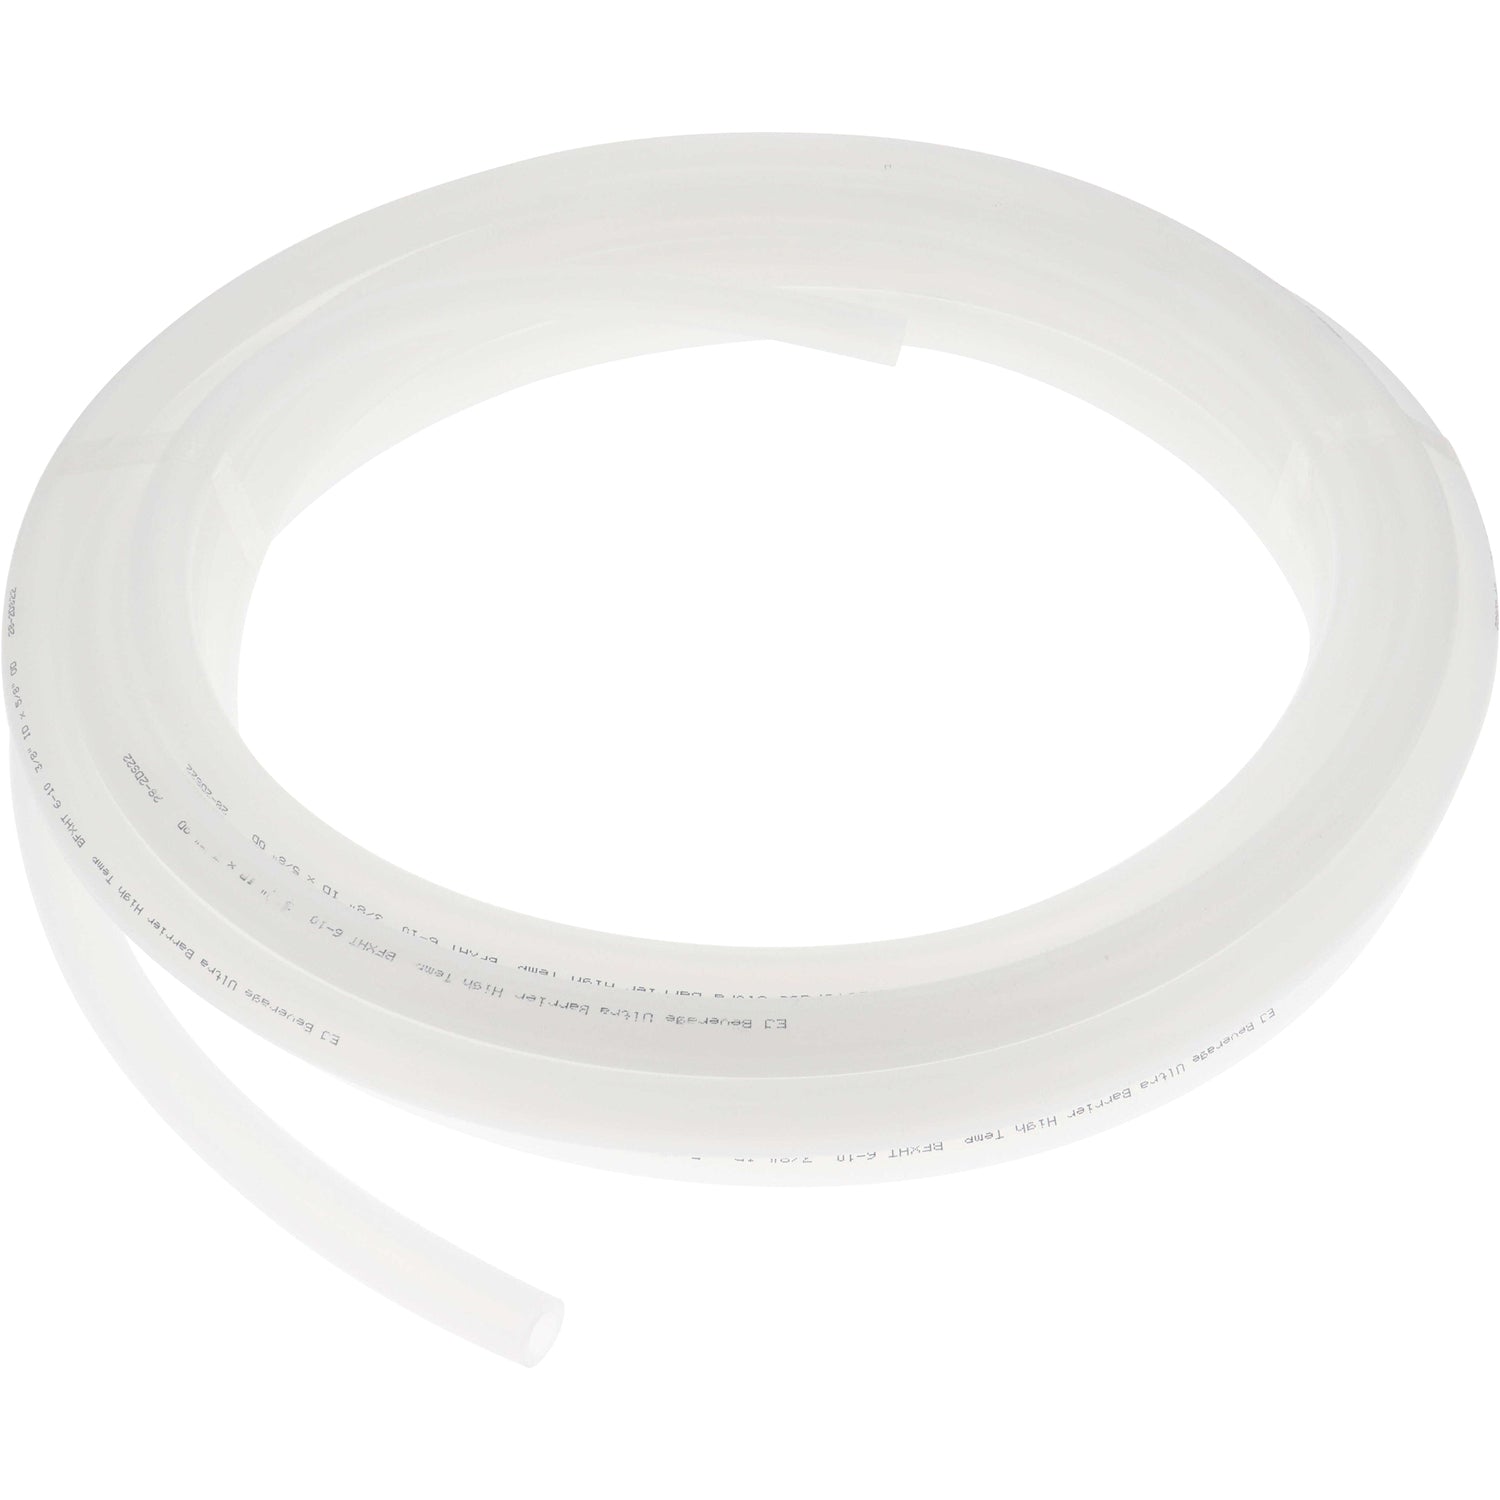 Semi transparent Thermoplastic Elastomer tubing coiled on white background. 08F01116